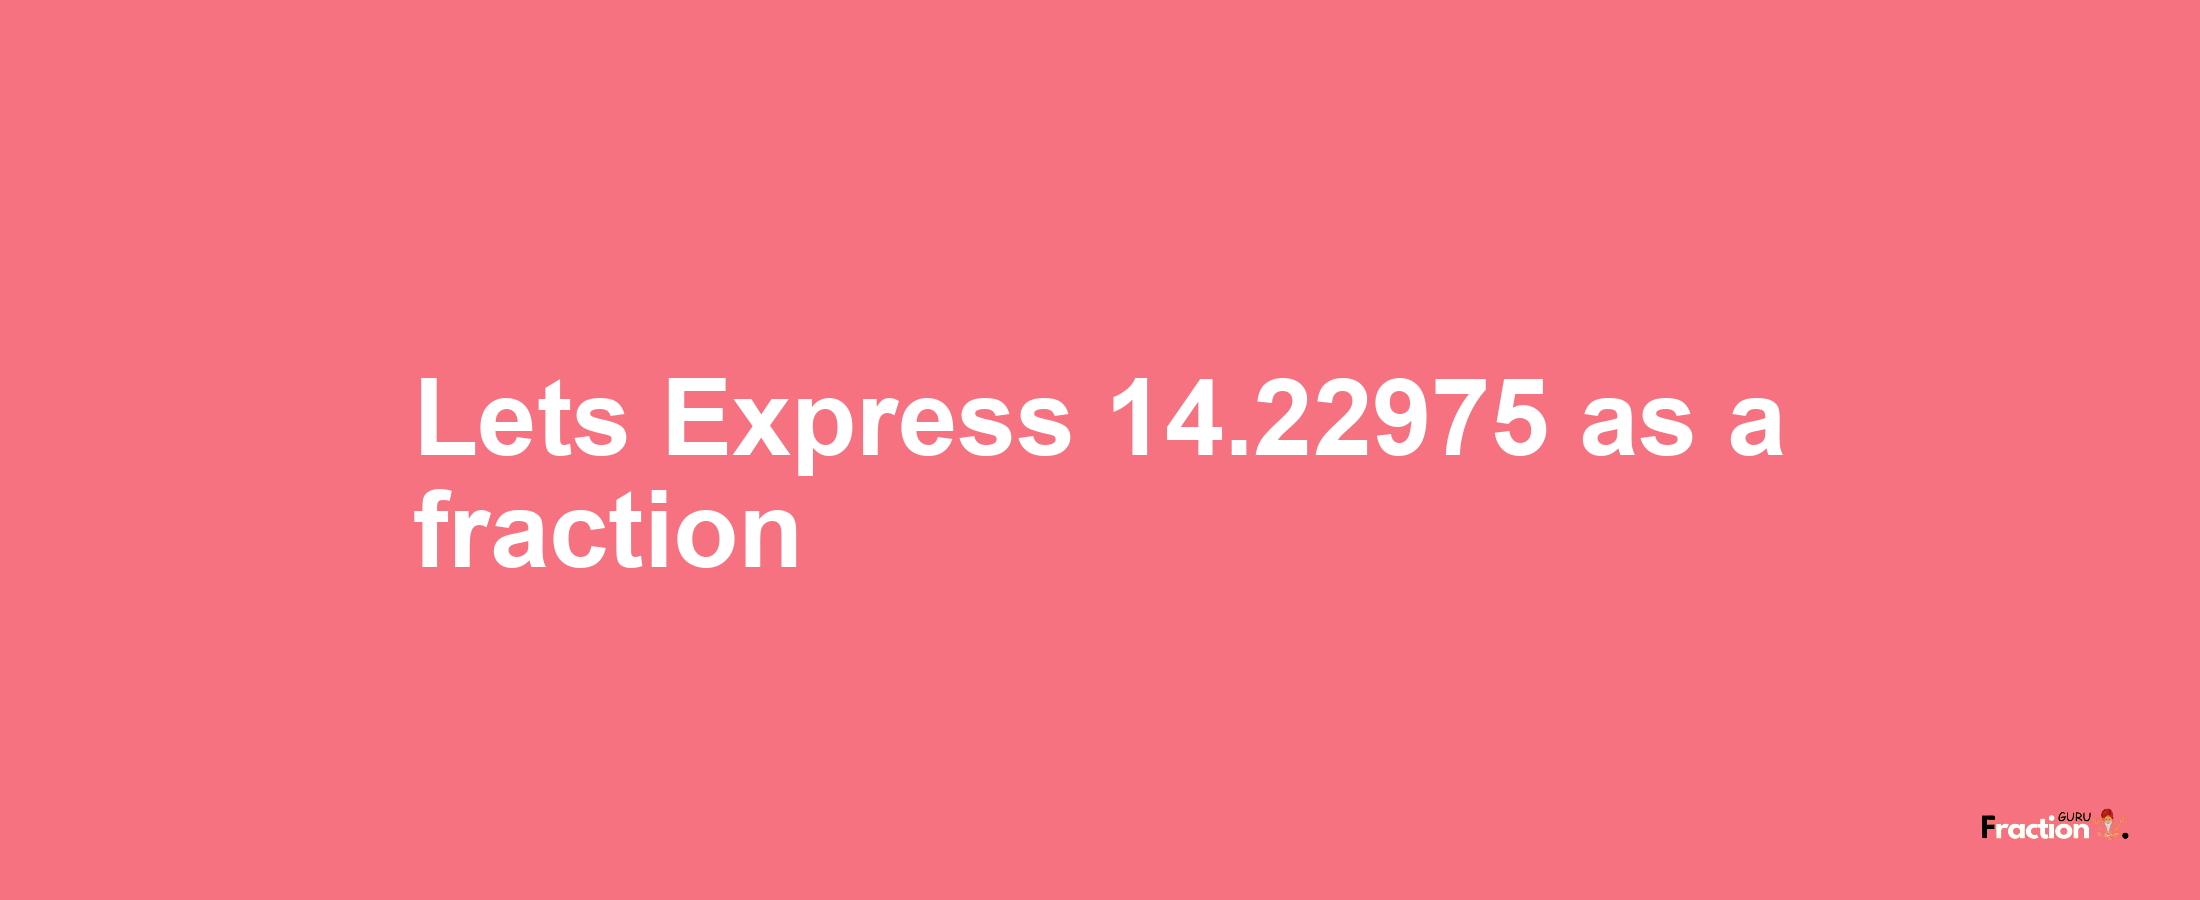 Lets Express 14.22975 as afraction